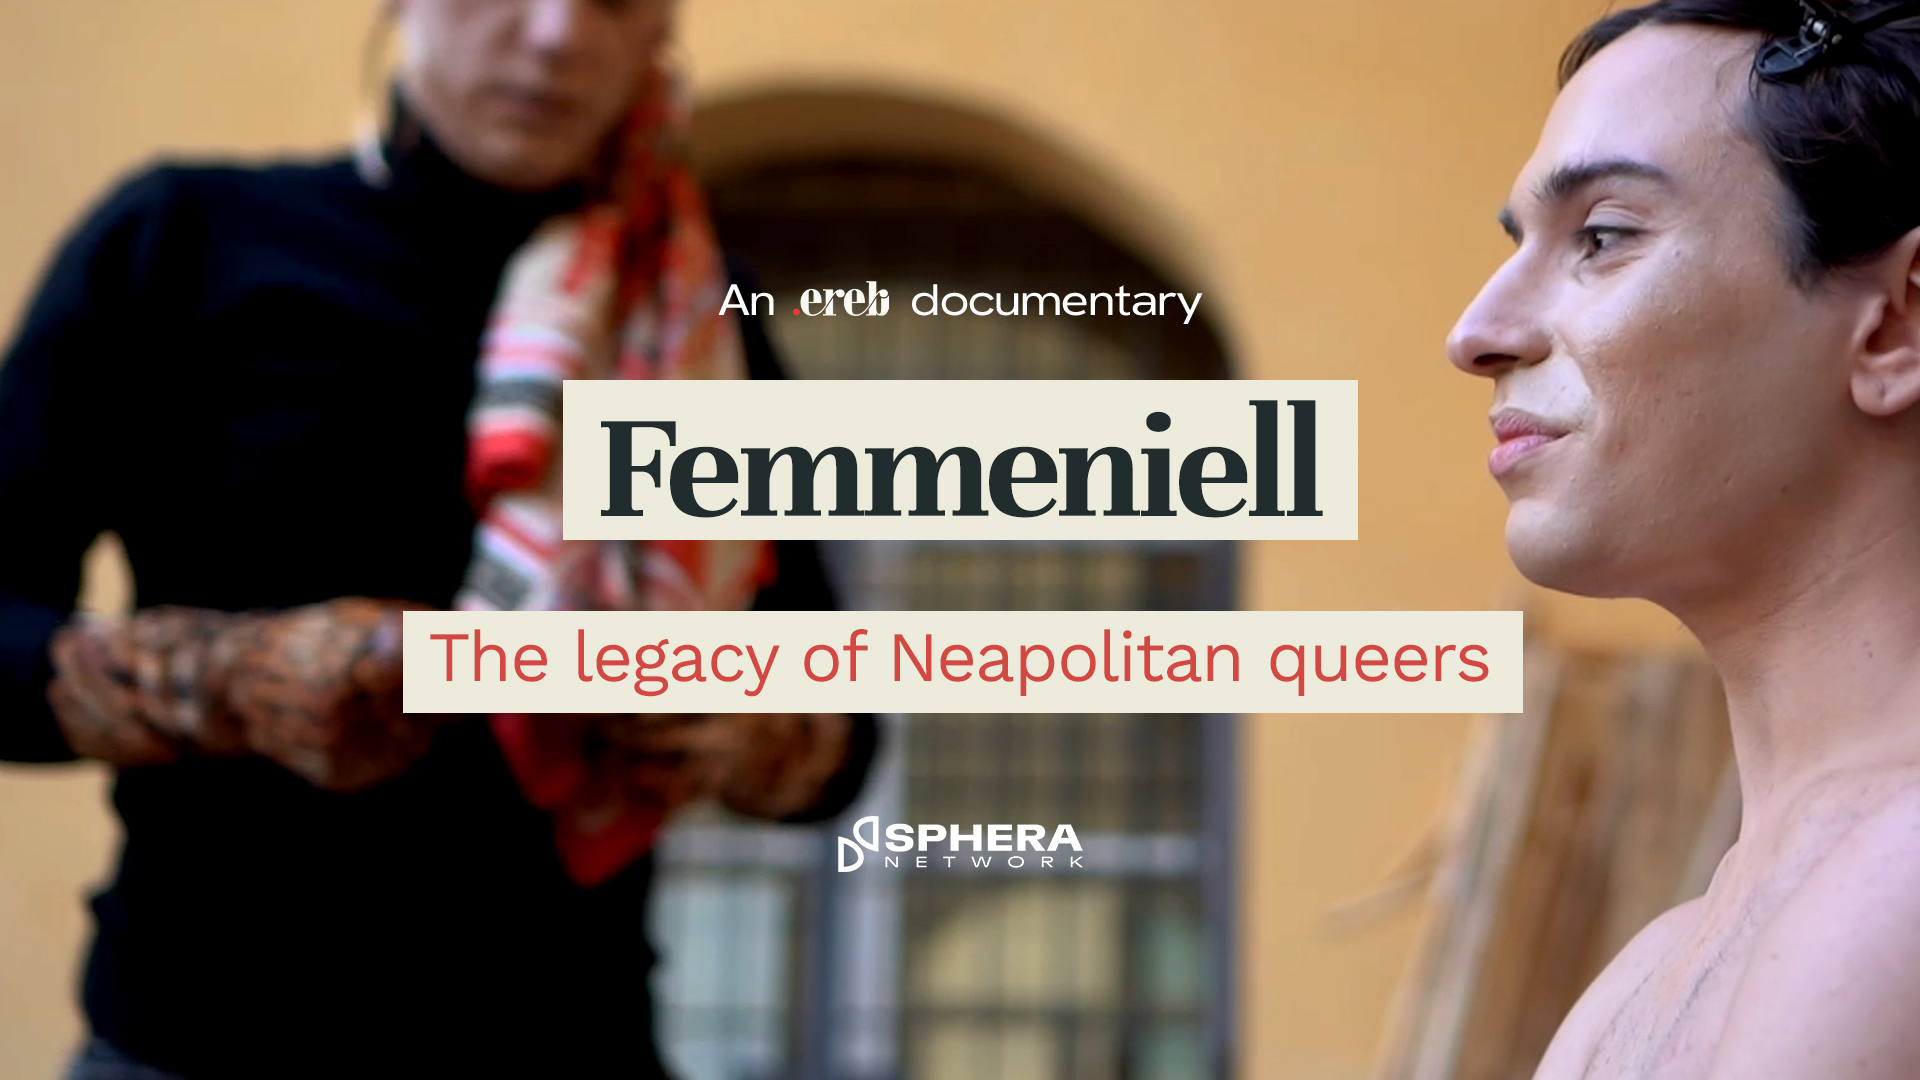 Femmeniell: the legacy of Neapolitan queers